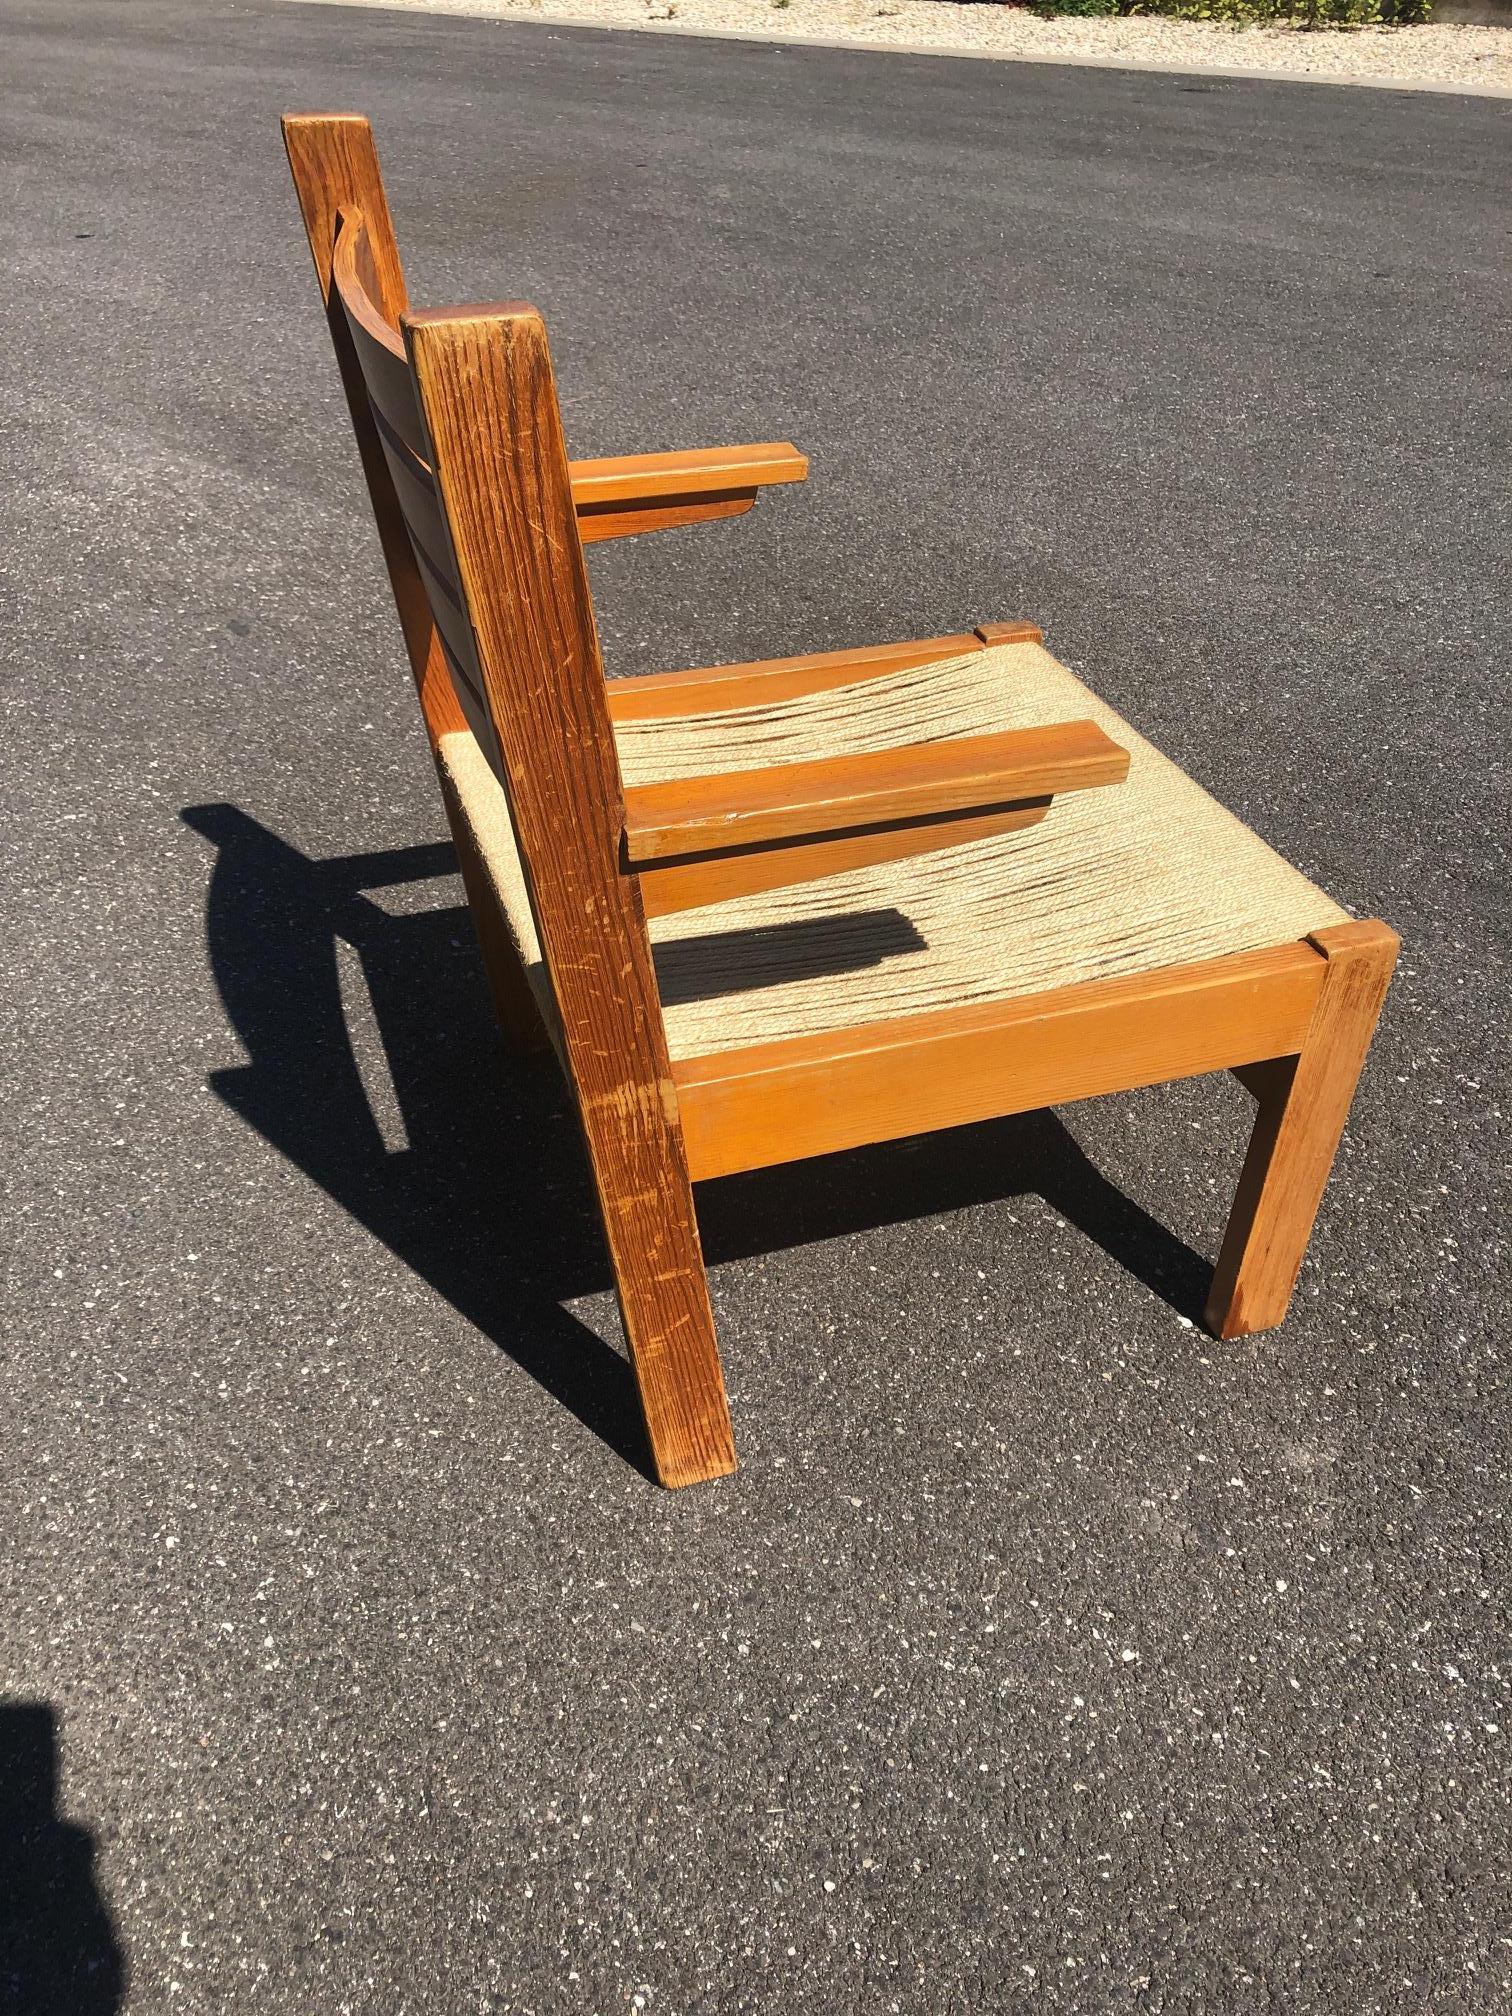 Pair of chairs with rope seat and pine frame from the 1960s.